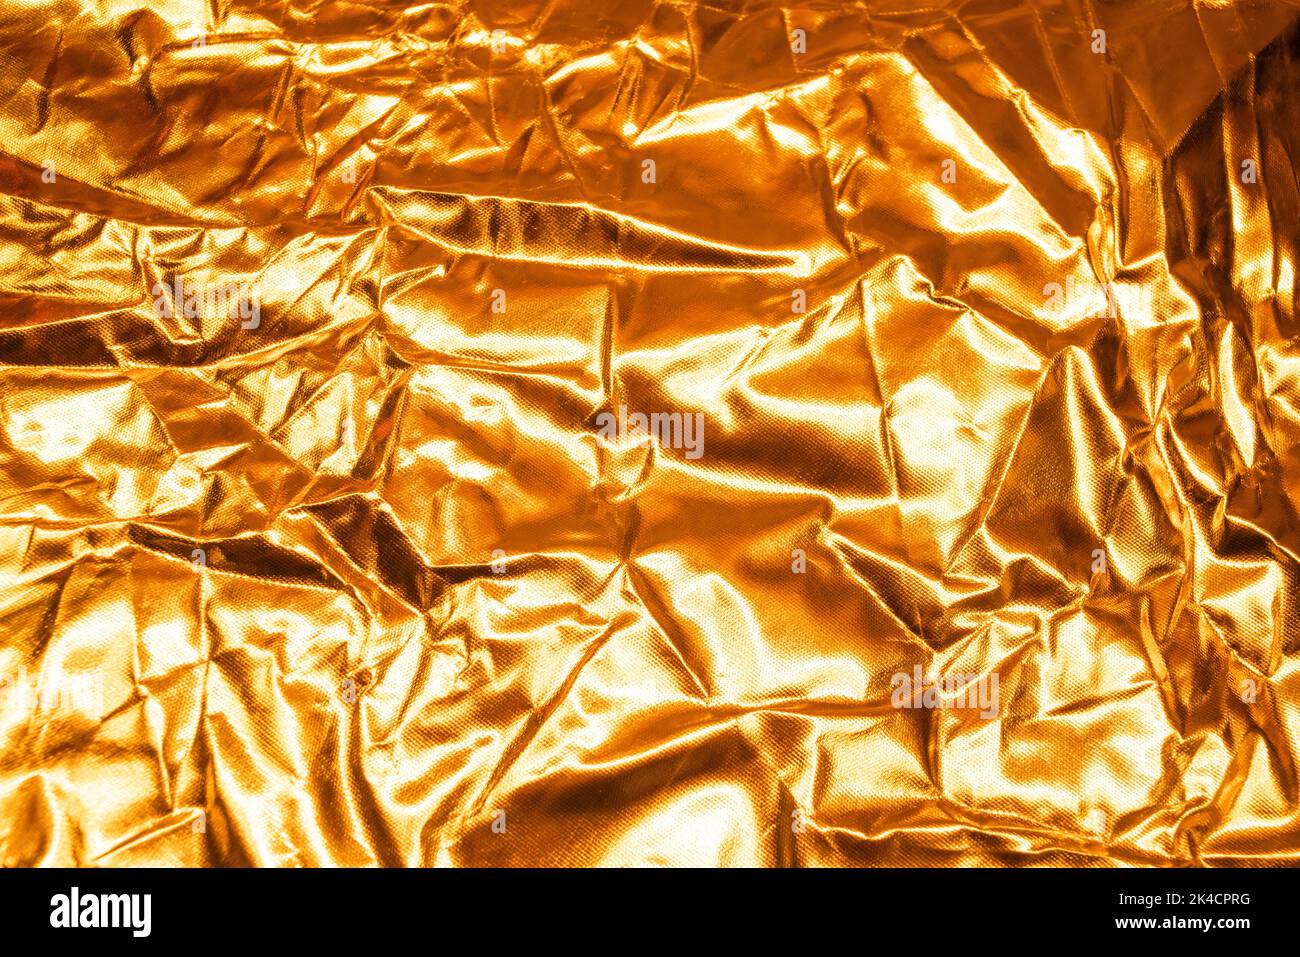 Gold foil background texture Stock Photo by ©AndreaA. 24685859